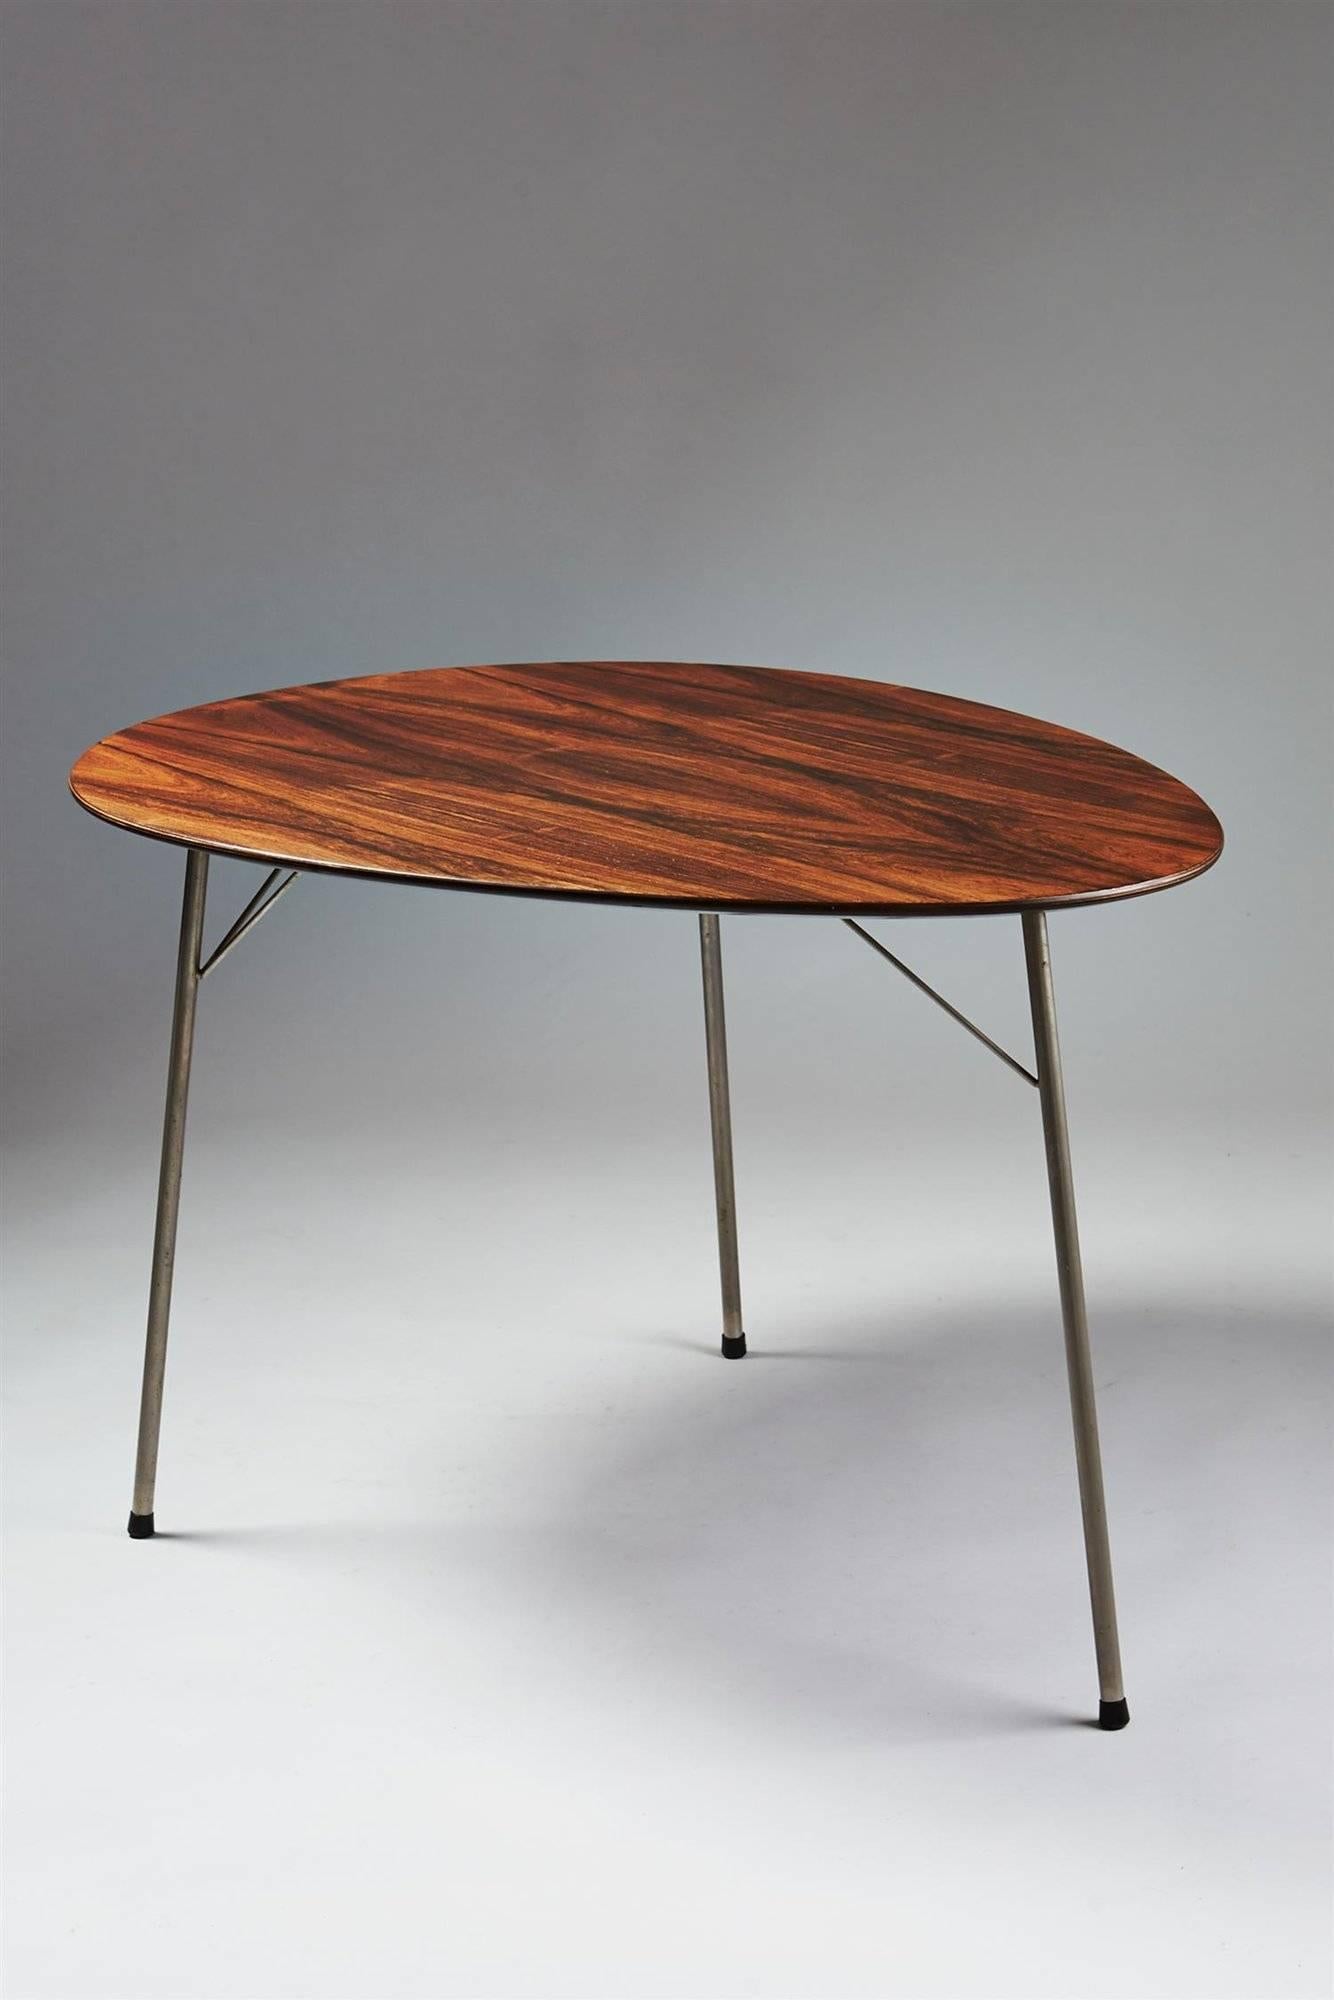 Dining table and four chairs, designed by Arne Jacobsen for Fritz Hansen, Denmark, 1965.
Rosewood and stainless steel.

Dimensions of the table:
H 69 cm/ 27 1/4''
L 115 cm/ 45 1/4''
D 84 cm/ 33''.